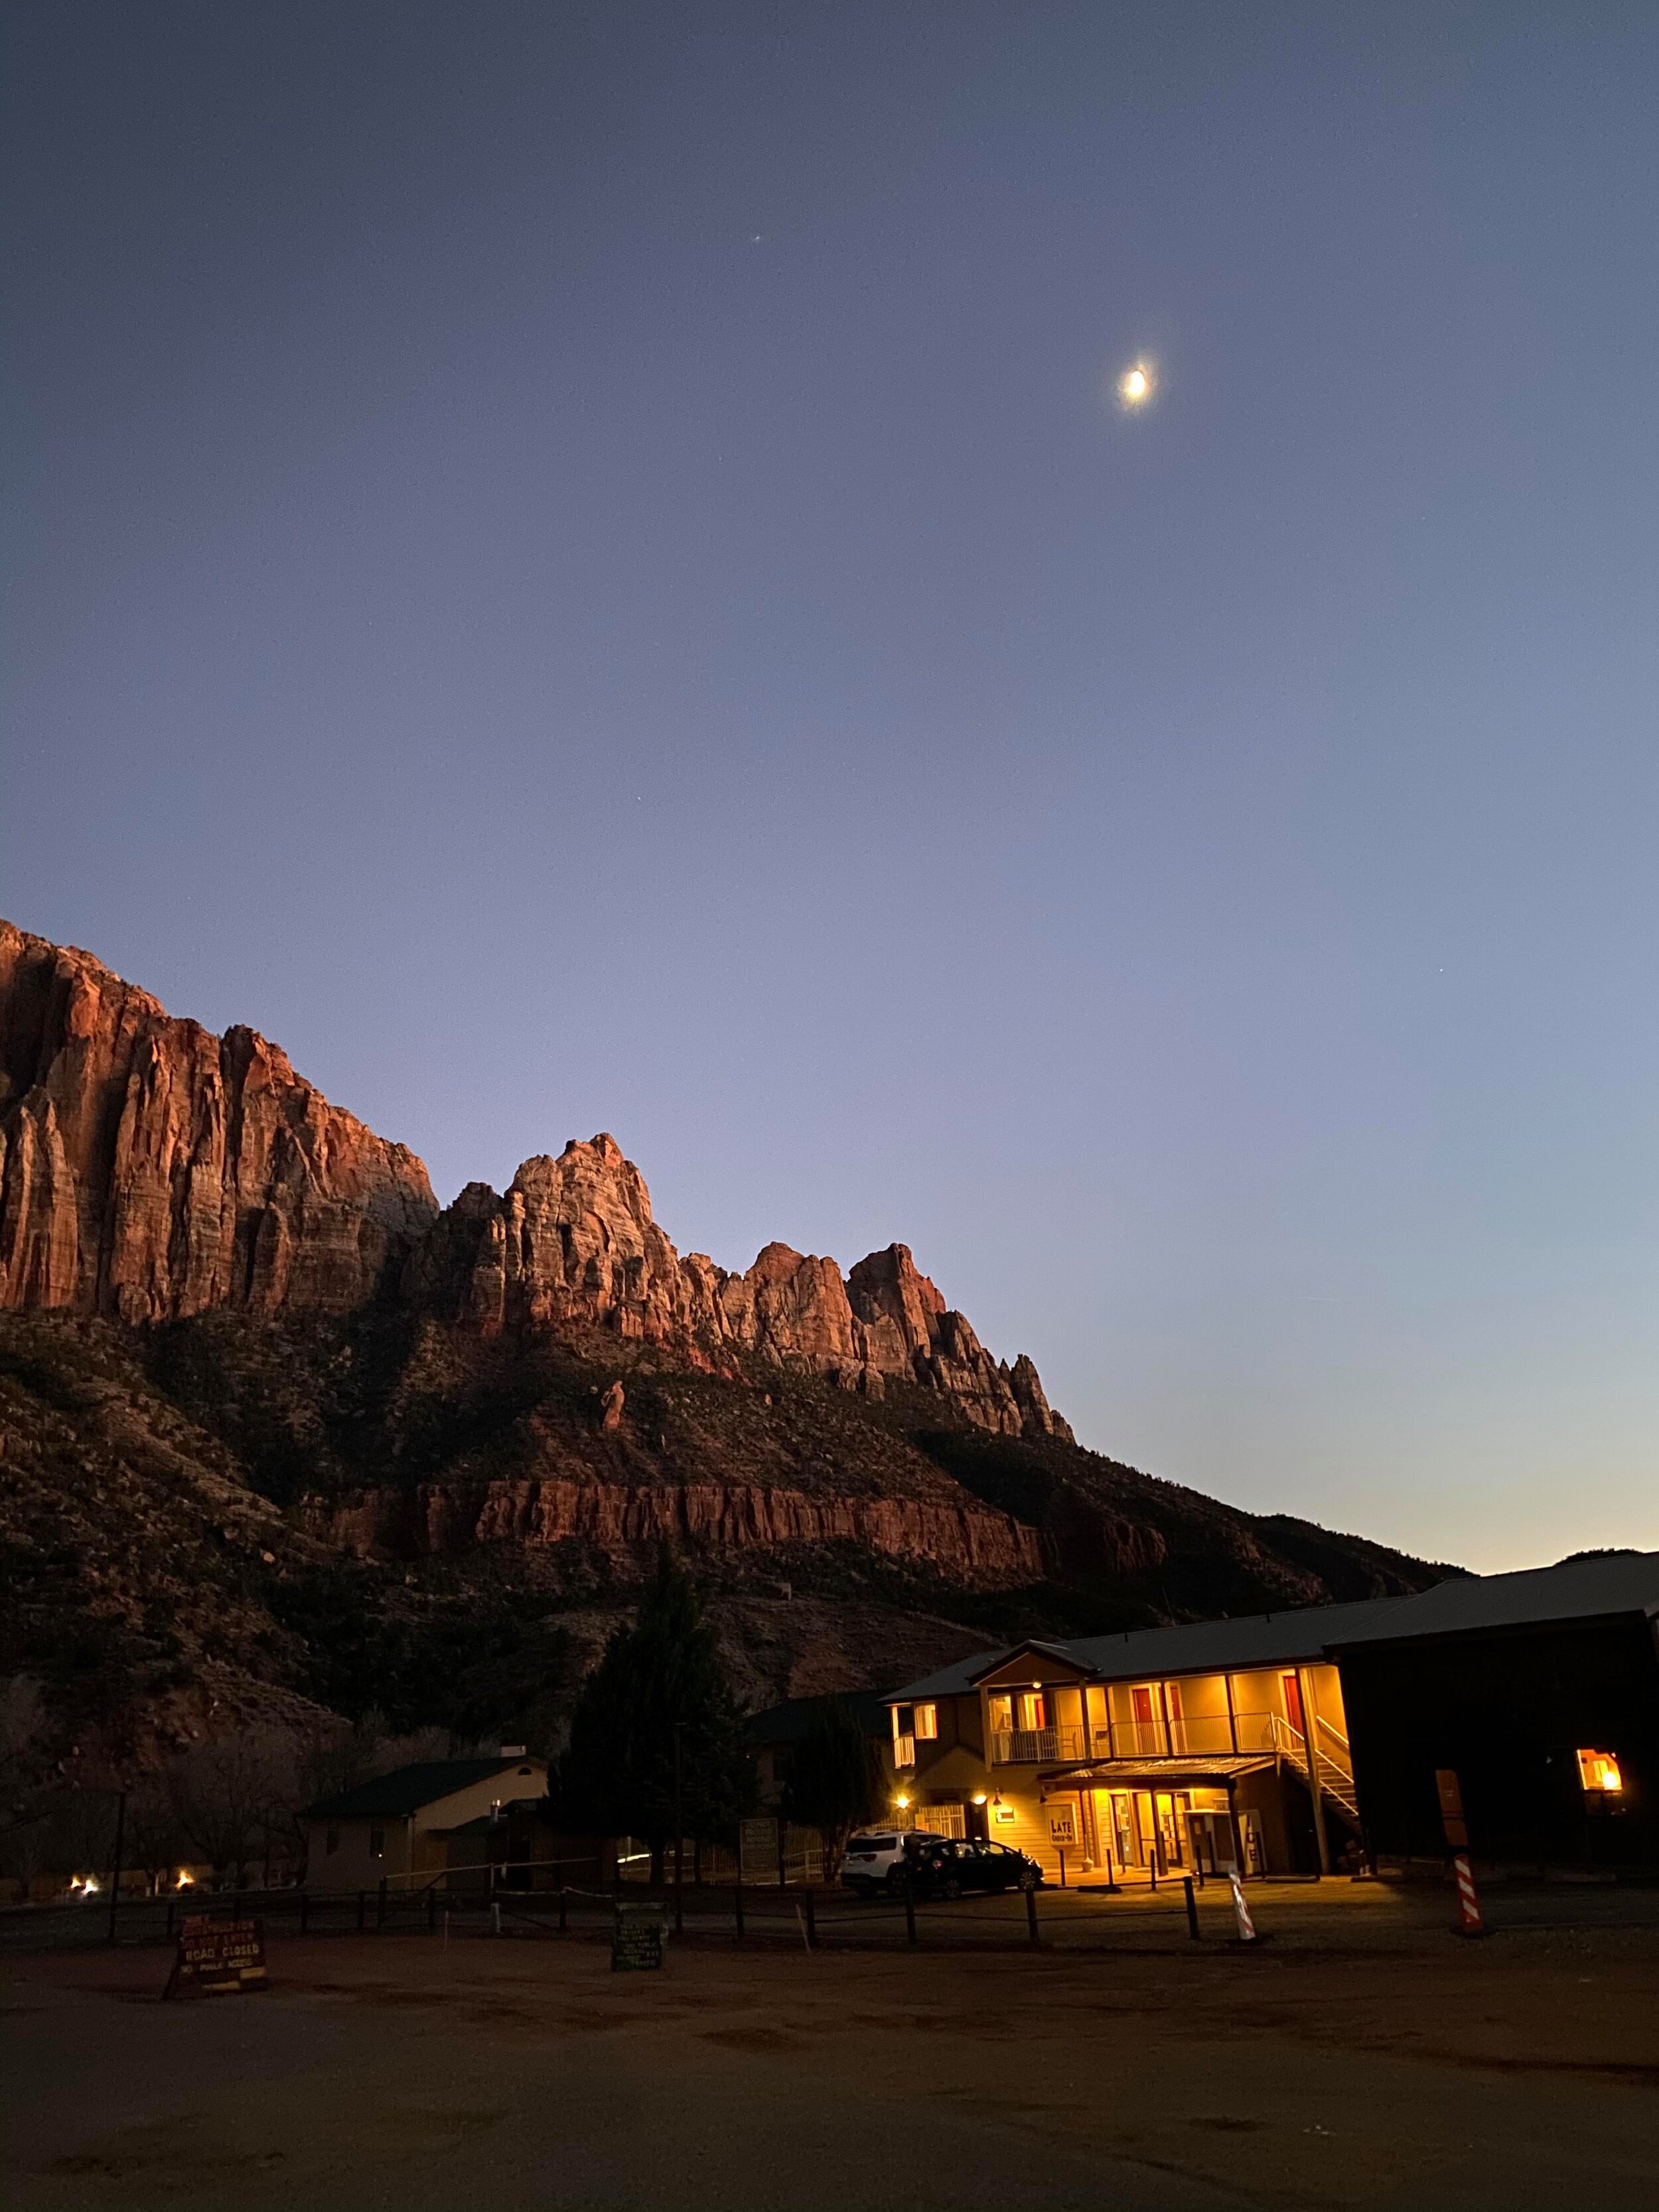 if you’re staying in or near zion national park, be sure to look up at night!